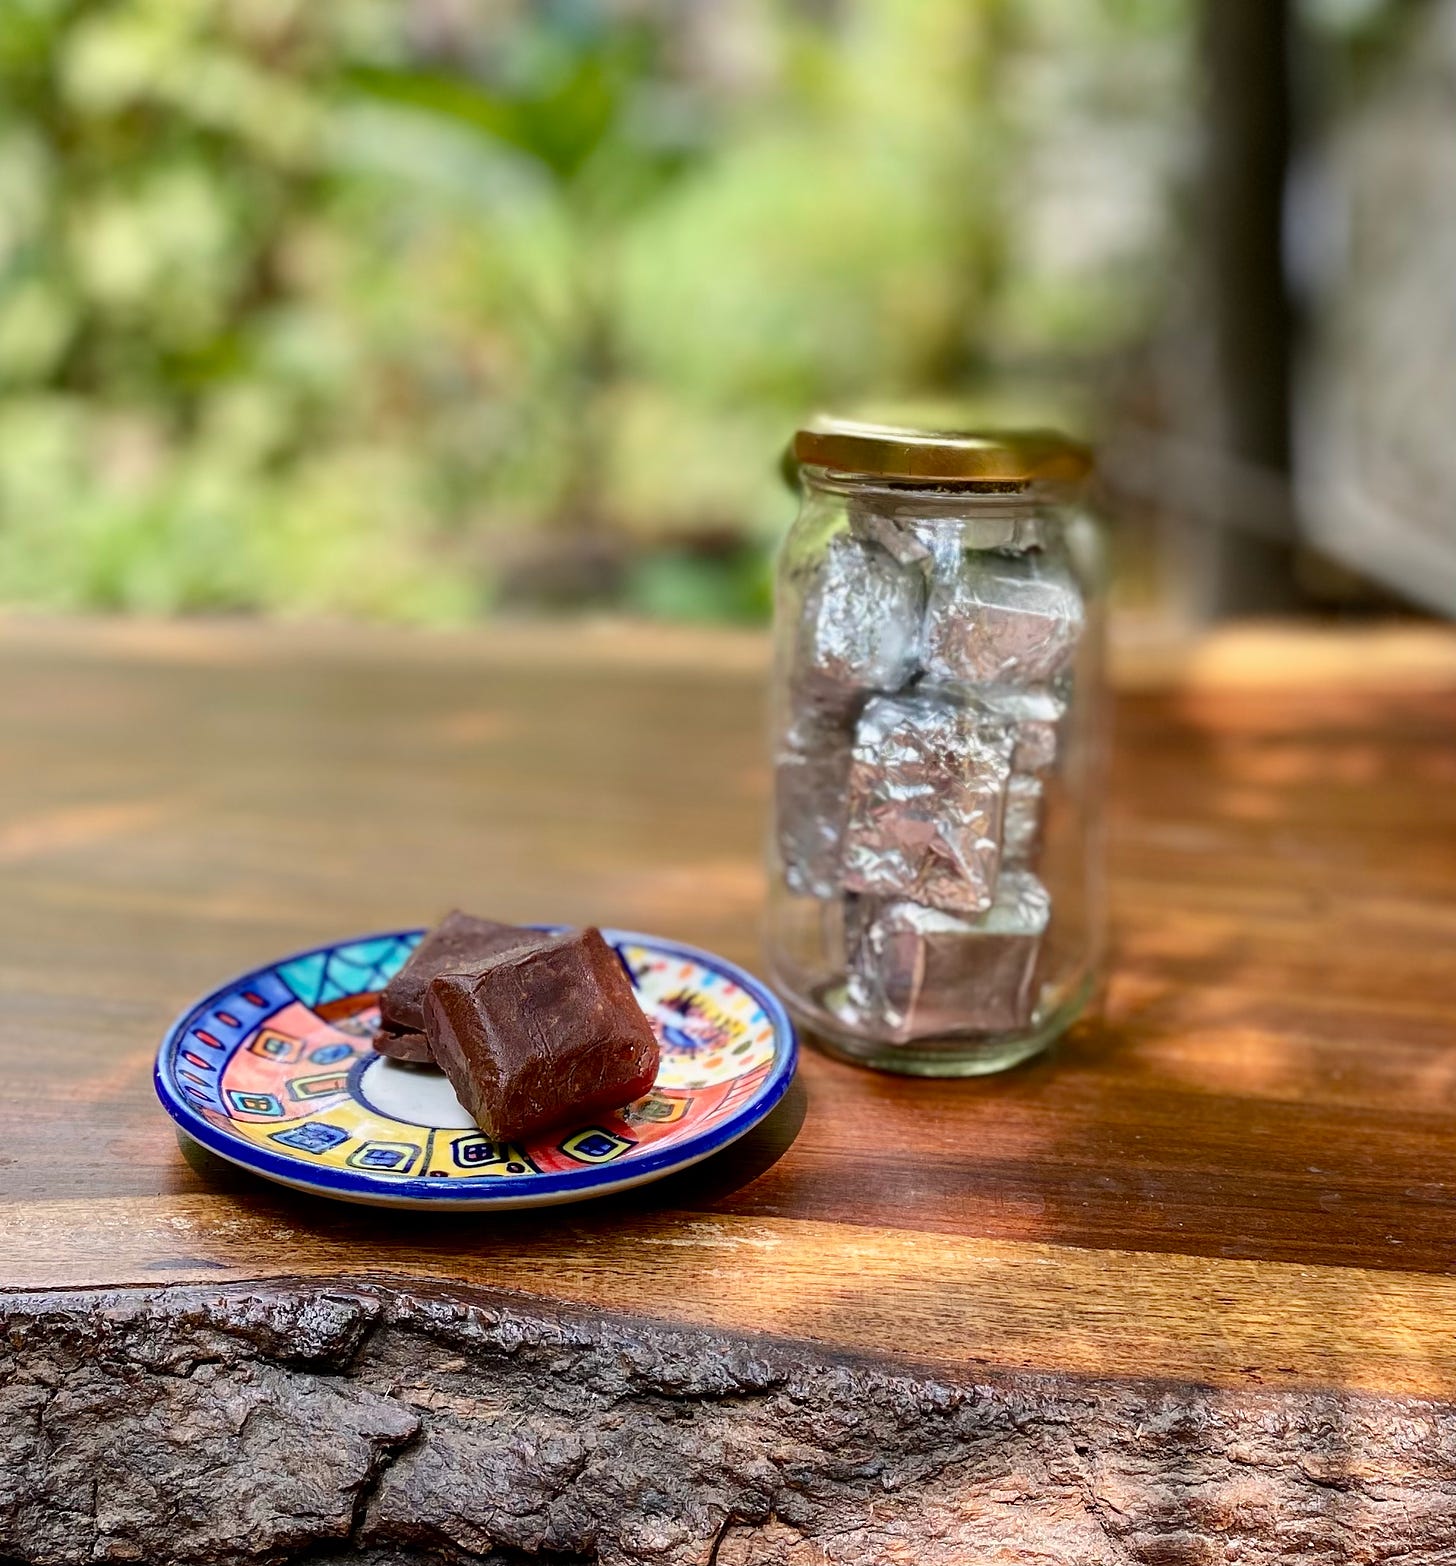 Photograph of two squares of fudge on a colourful plate and a glass bottle of foil-wrapped fudge on a rough wooden tabletop